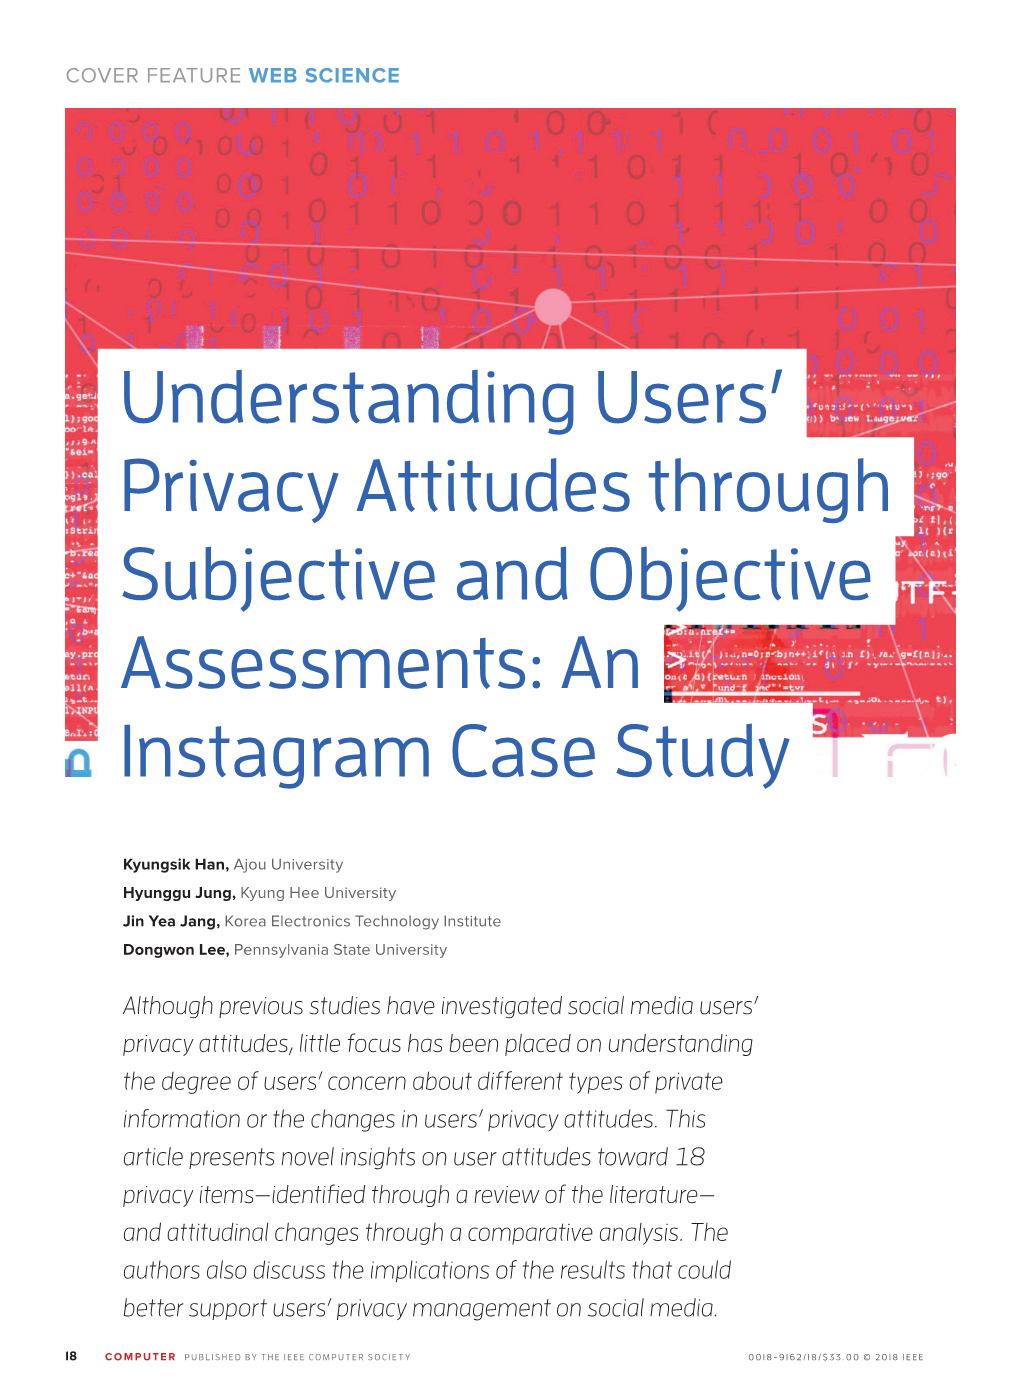 Understanding Users' Privacy Attitudes Through Subjective and Objective Assessments: an Instagram Case Study